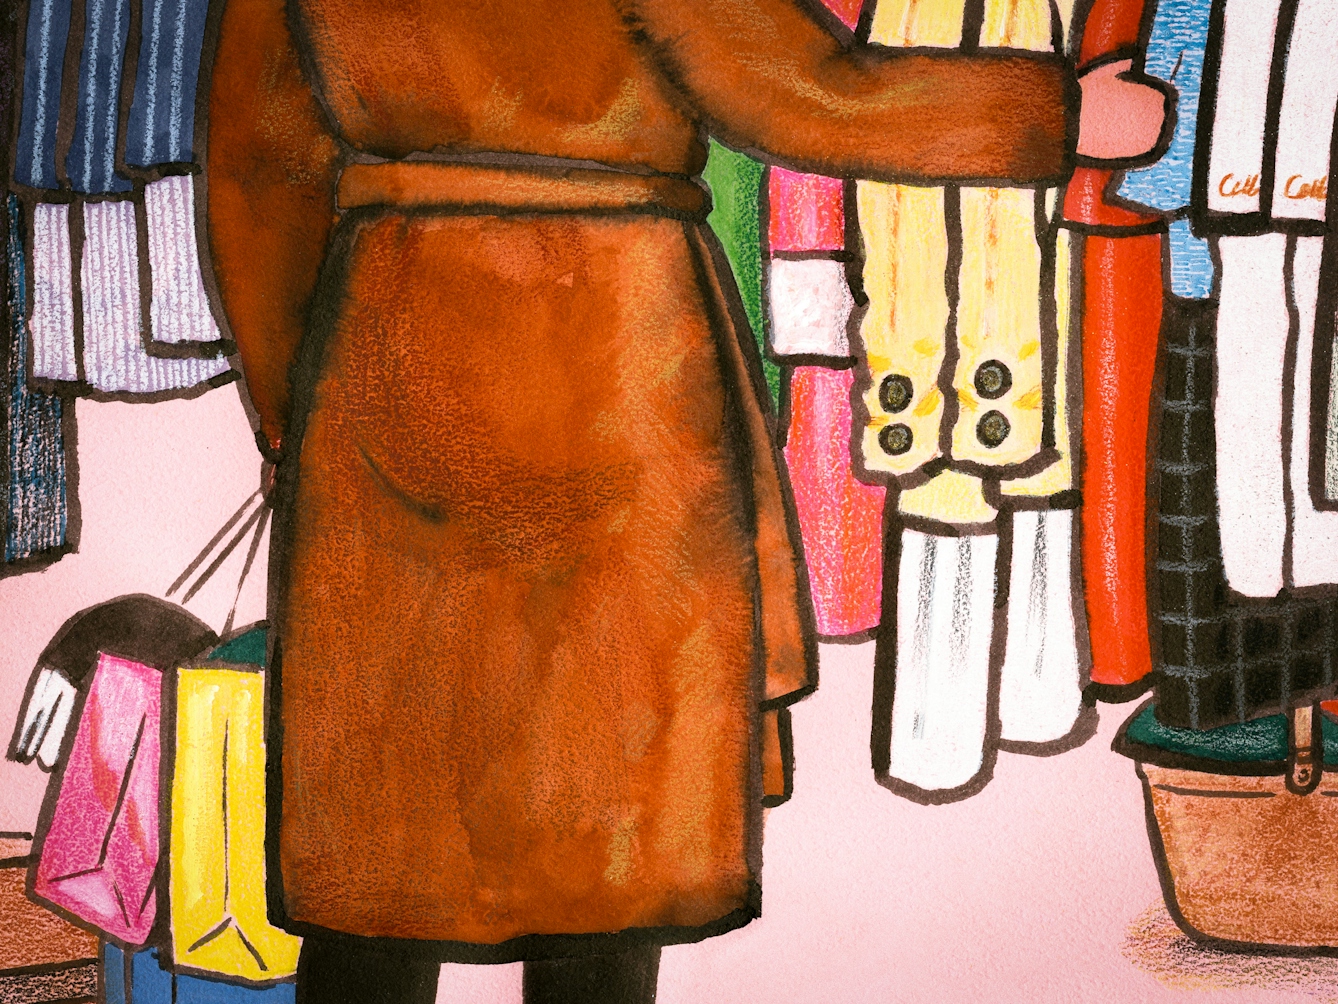 Detail from a larger colour hand drawn artwork showing a clothing market scene. Several people are depicted from the shoulders down, excluding their faces. The people who are carrying shopping bags, are browsing clothing which is hanging from a rail. On the floor are several pairs of shoes and bags and boxes.